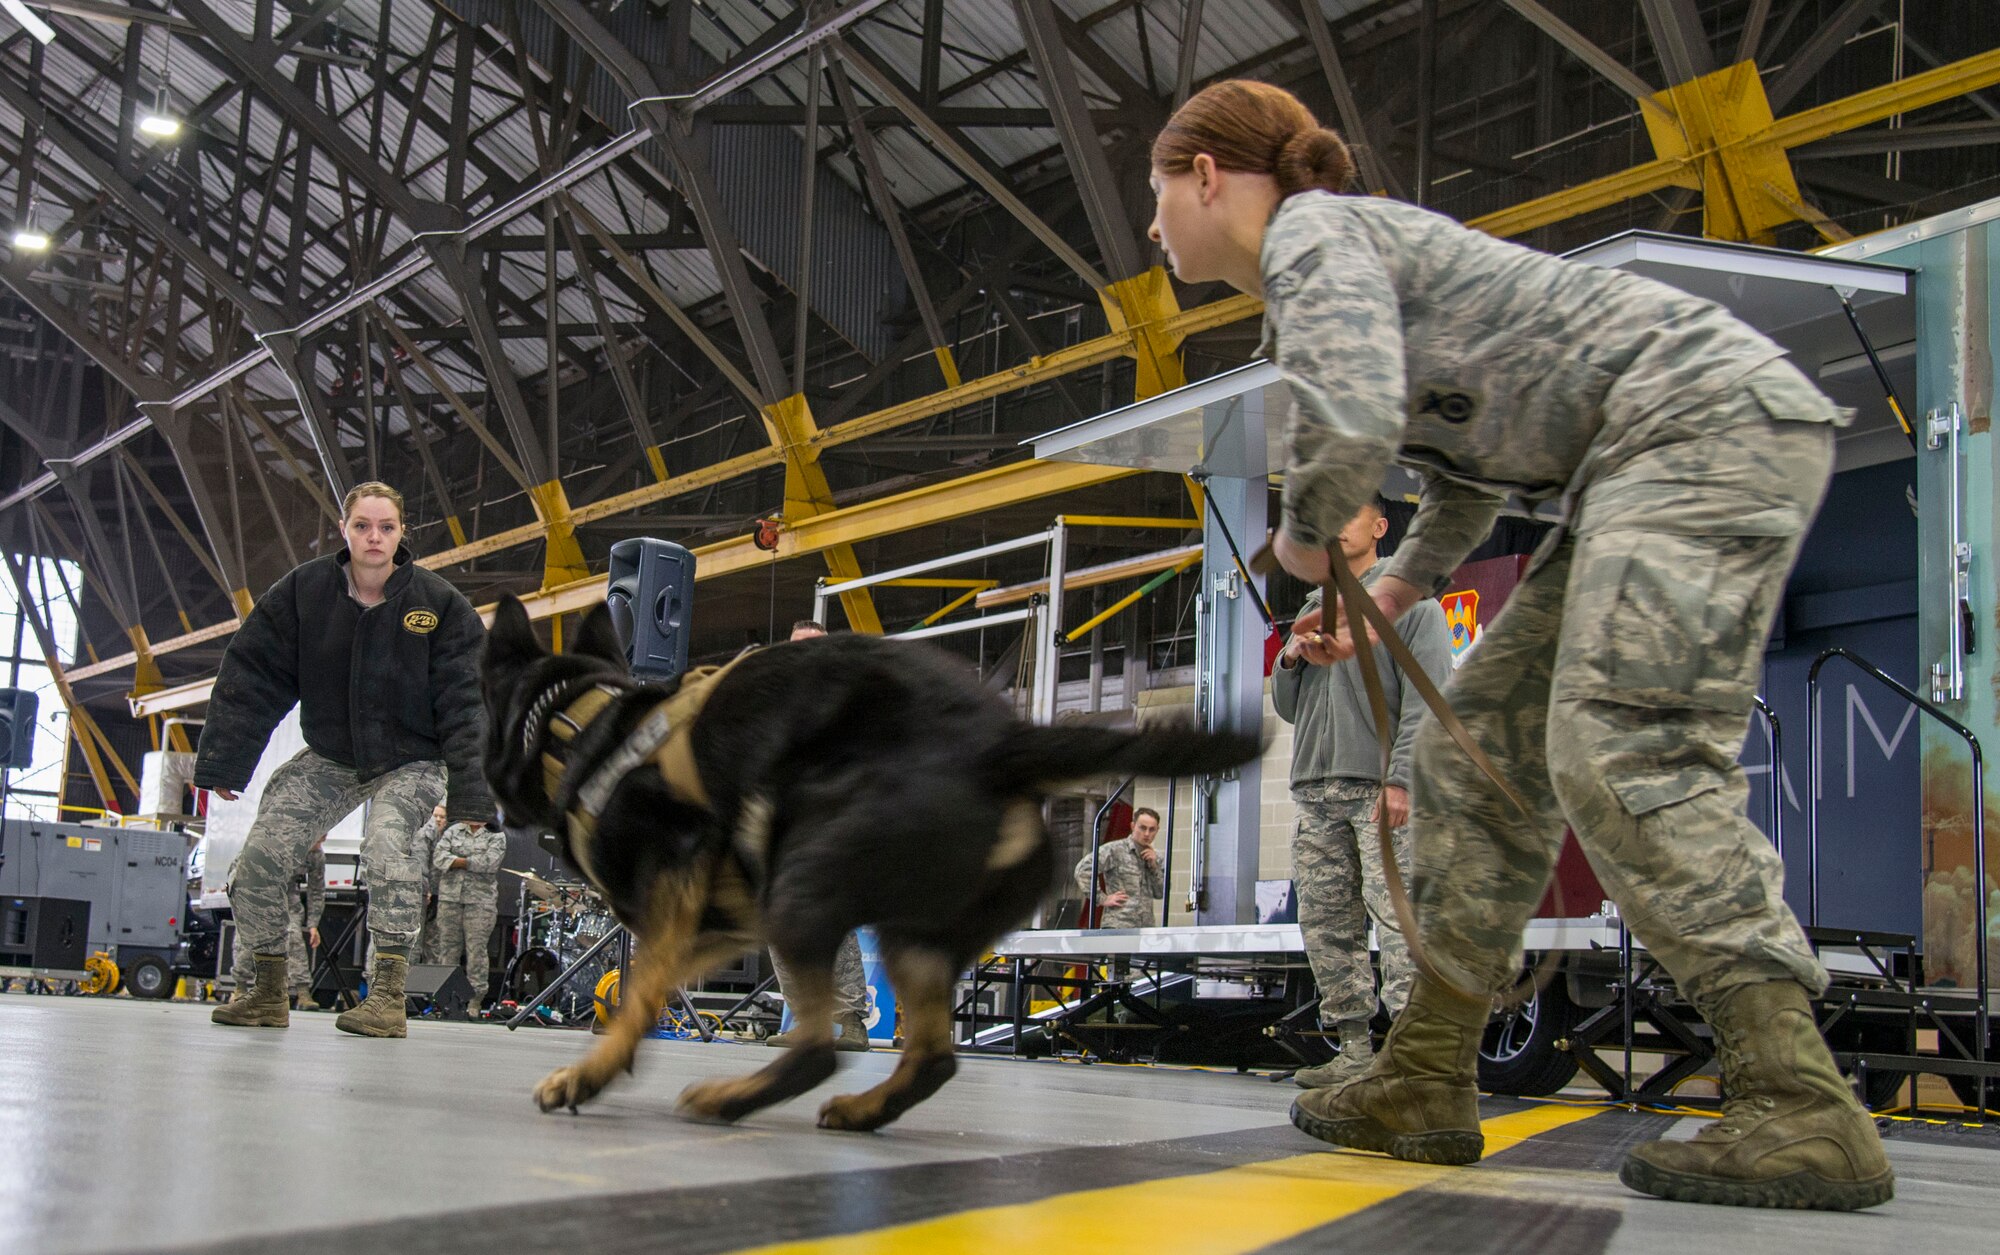 Staff Sgt. Sheridyn Rupp and Senior Airman Eve Caballero, 375th Security Forces Squadron military working dog handlers, and Kaso, 375th SFS MWD, demonstrate how MWDs assist in law enforcement scenarios during the 2019 science, technology, engineering, arts, and math day at Scott Air Force Base, Ill., March 28, 2019. Caballero showed the crowd of students how Kaso is utilized by Security Forces to apprehend, deter and defend against hostiles. (U.S. Air Force photo by Airman 1st Class Nathaniel Hudson)